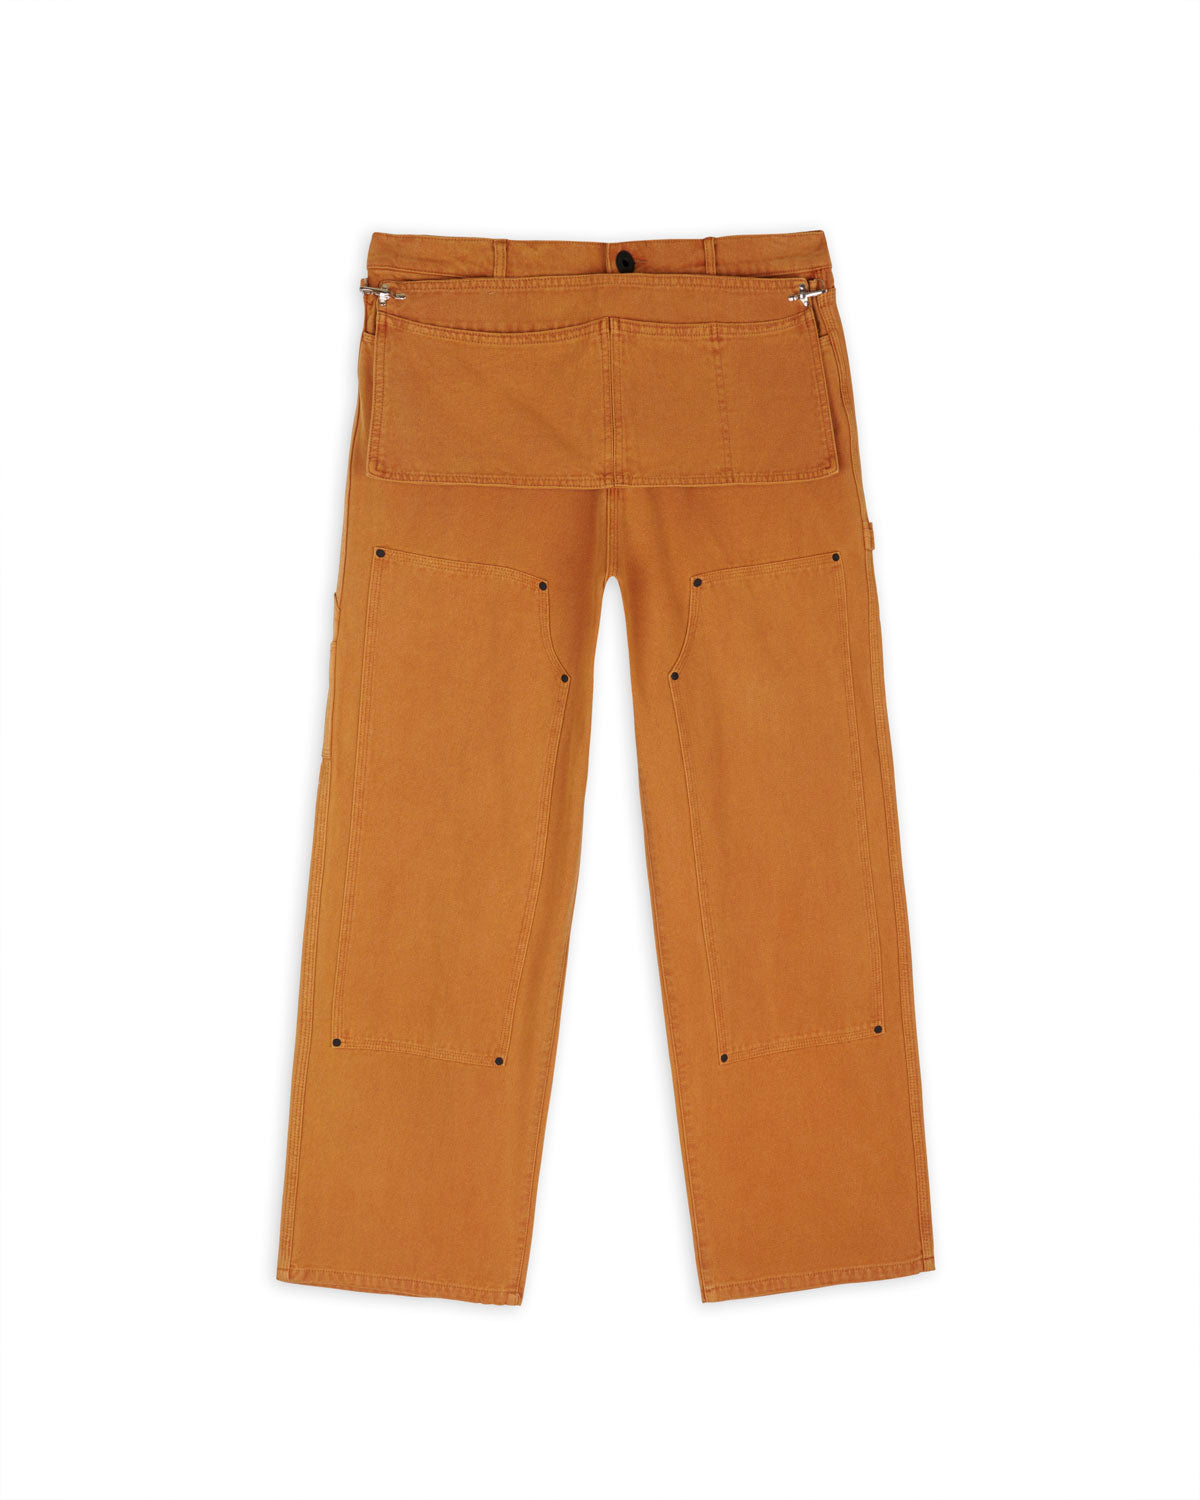 Canvas Gardening Pant - Washed Duck Brown 1